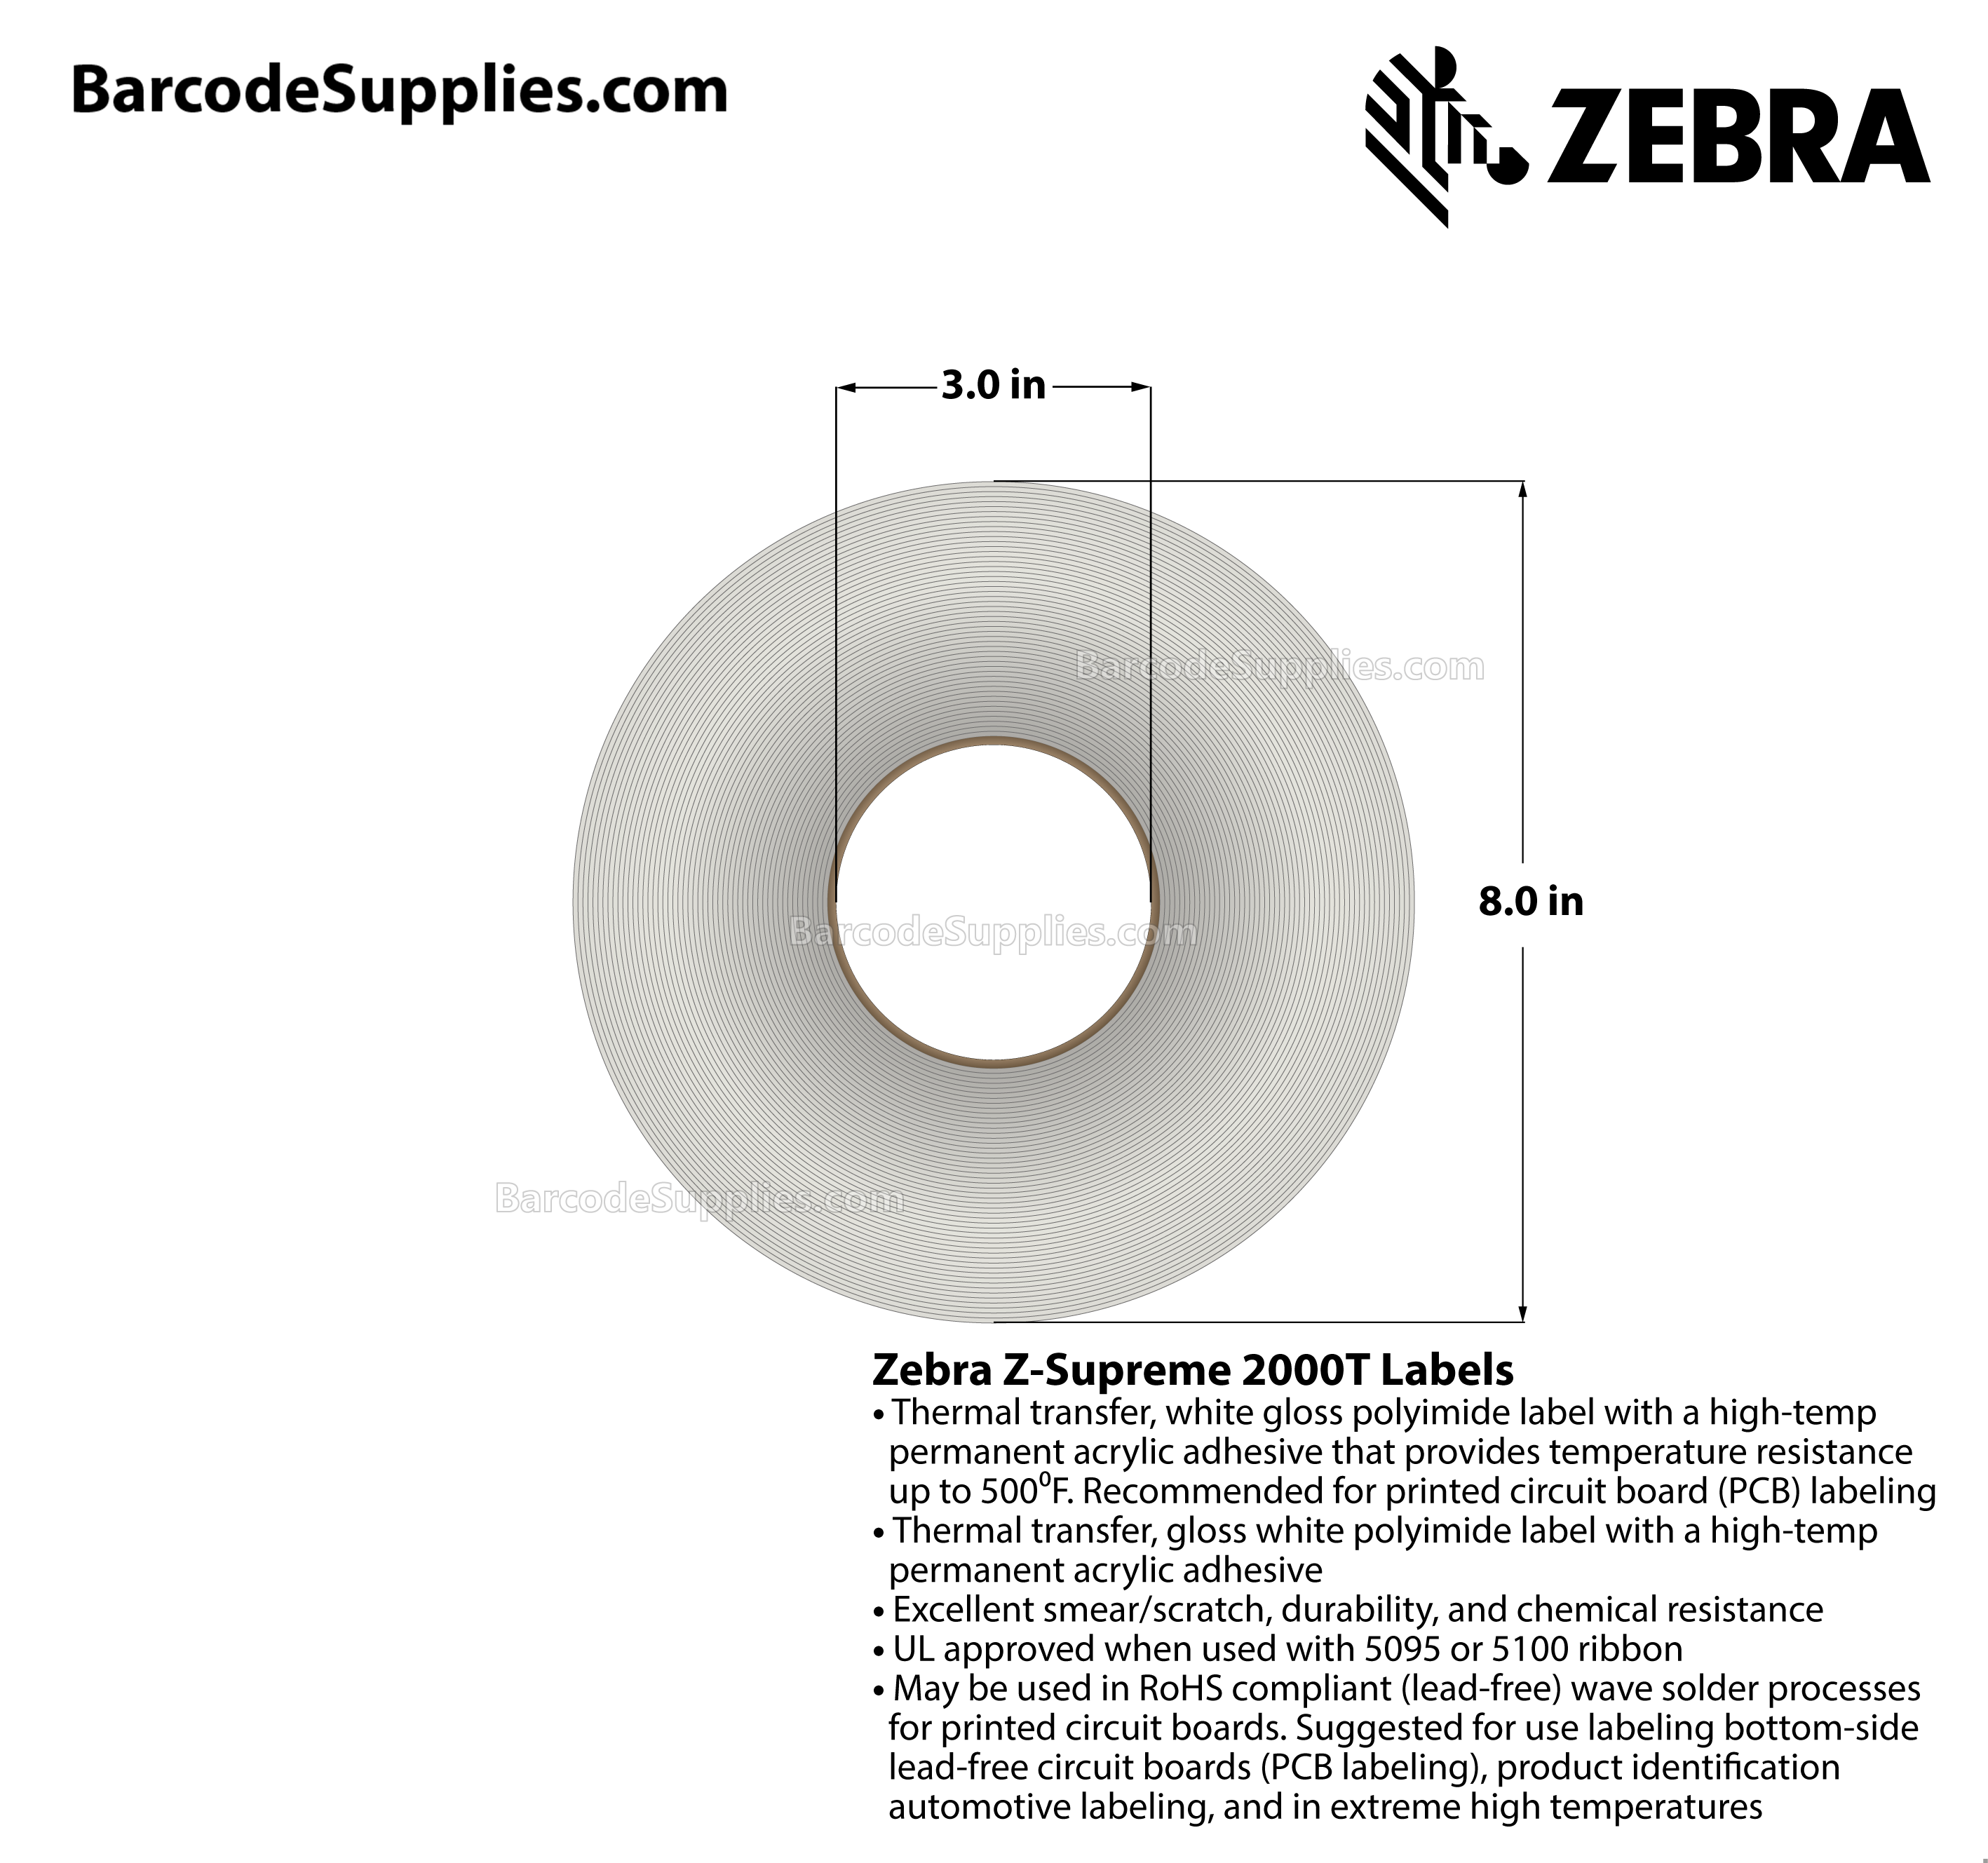 0.75 x 0.25 Thermal Transfer White Z-Supreme 2000T (4-Across) Labels With Permanent Adhesive - Perforated - 10000 Labels Per Roll - Carton Of 1 Rolls - 10000 Labels Total - MPN: 10023193